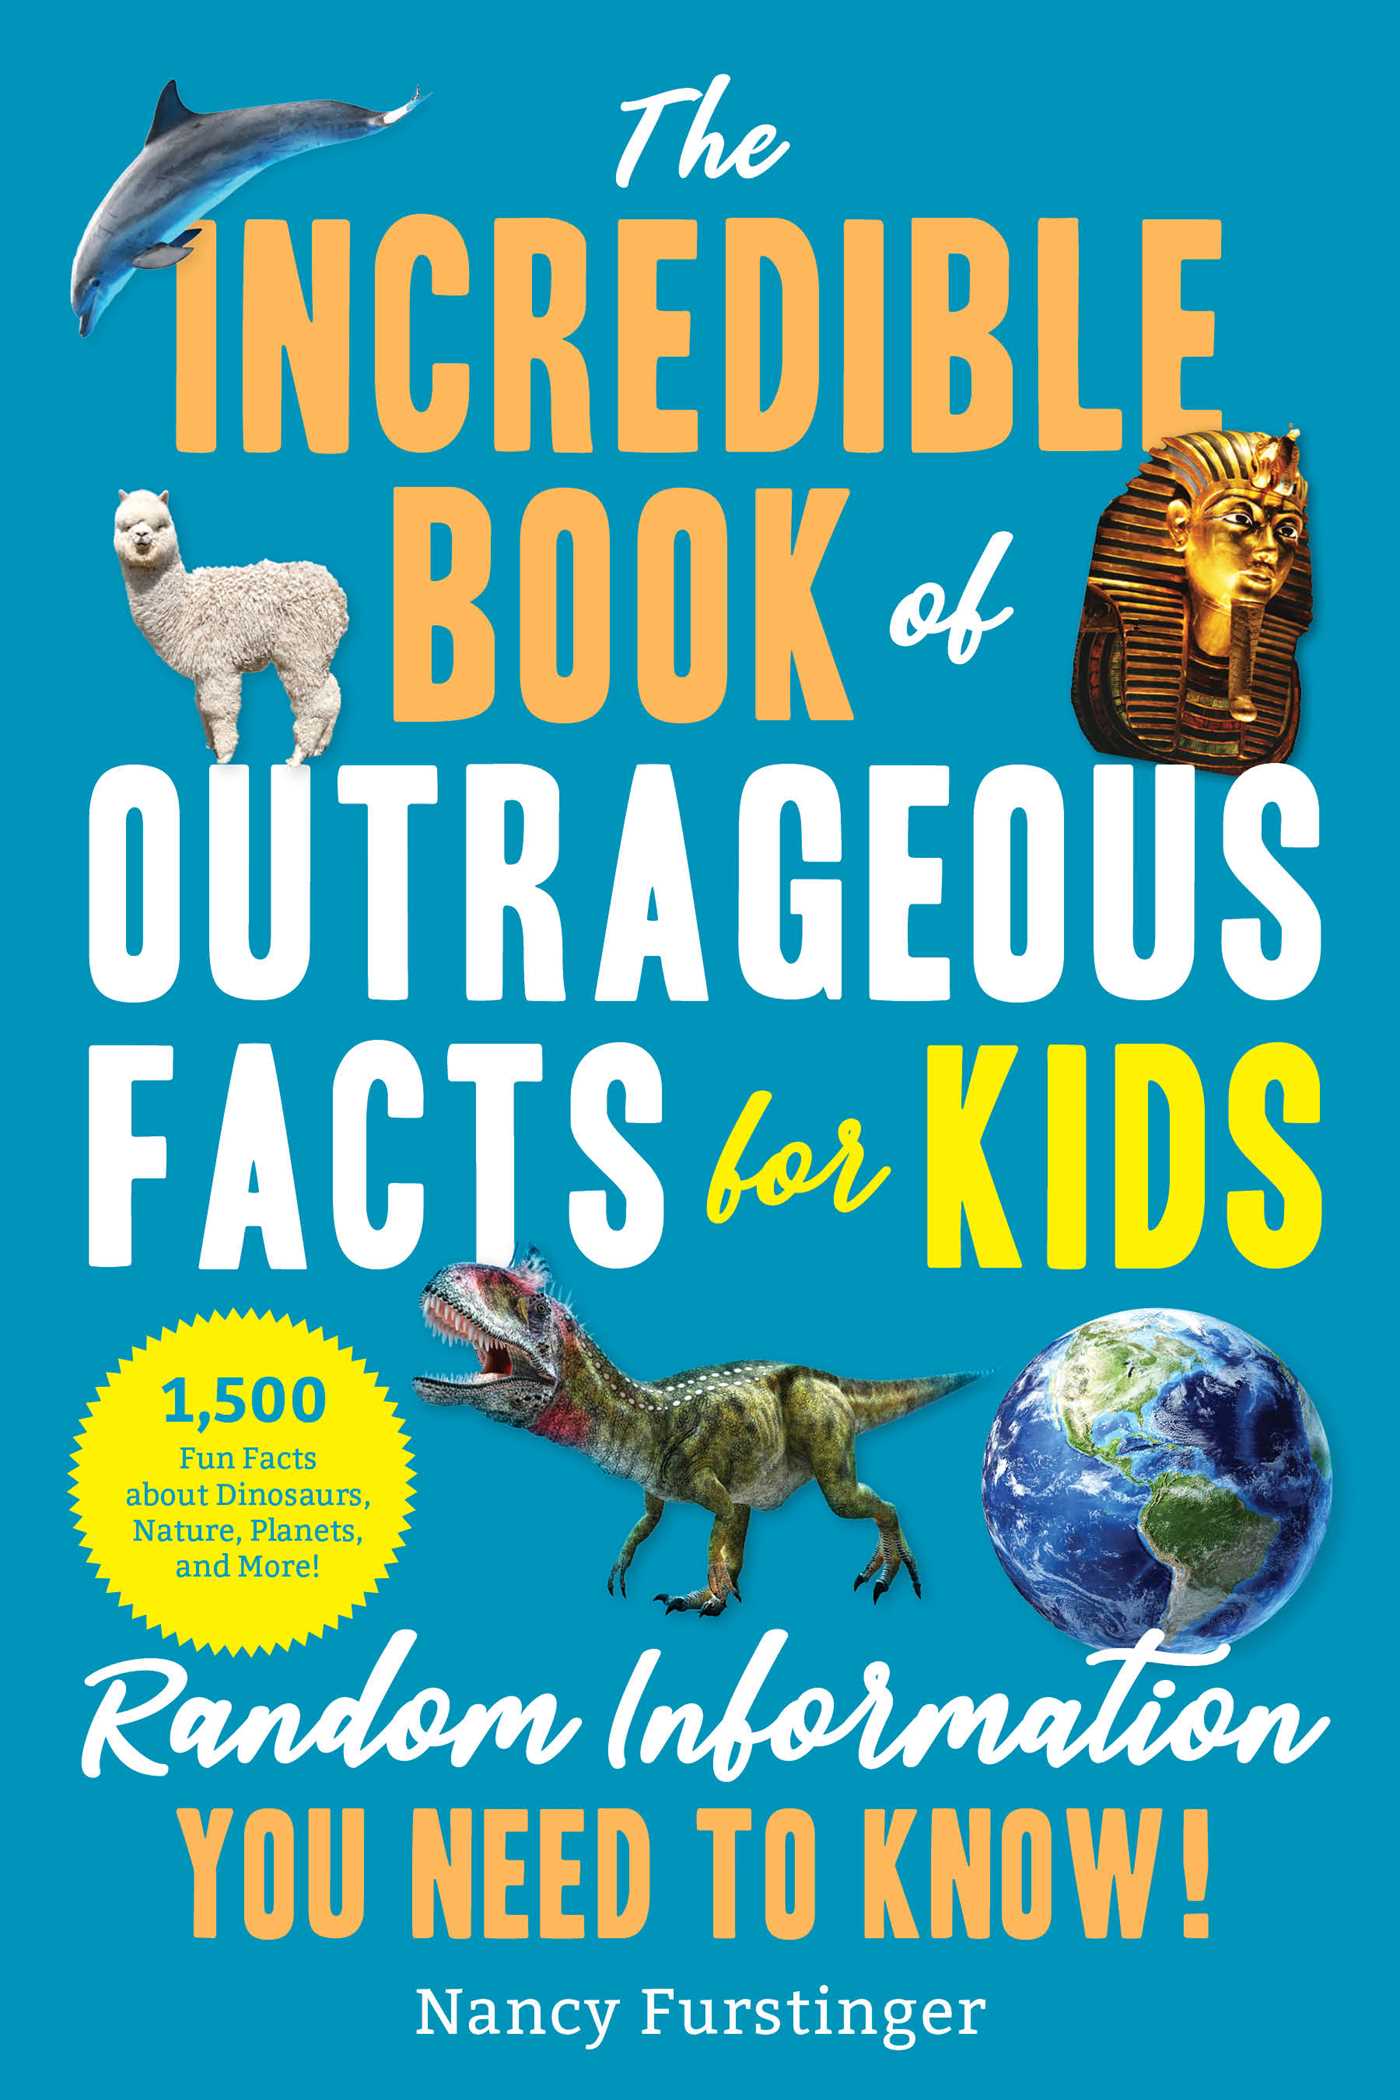 The Incredible Book of Outrageous Facts for Kids : Random Information You Need to Know! | Furstinger, Nancy